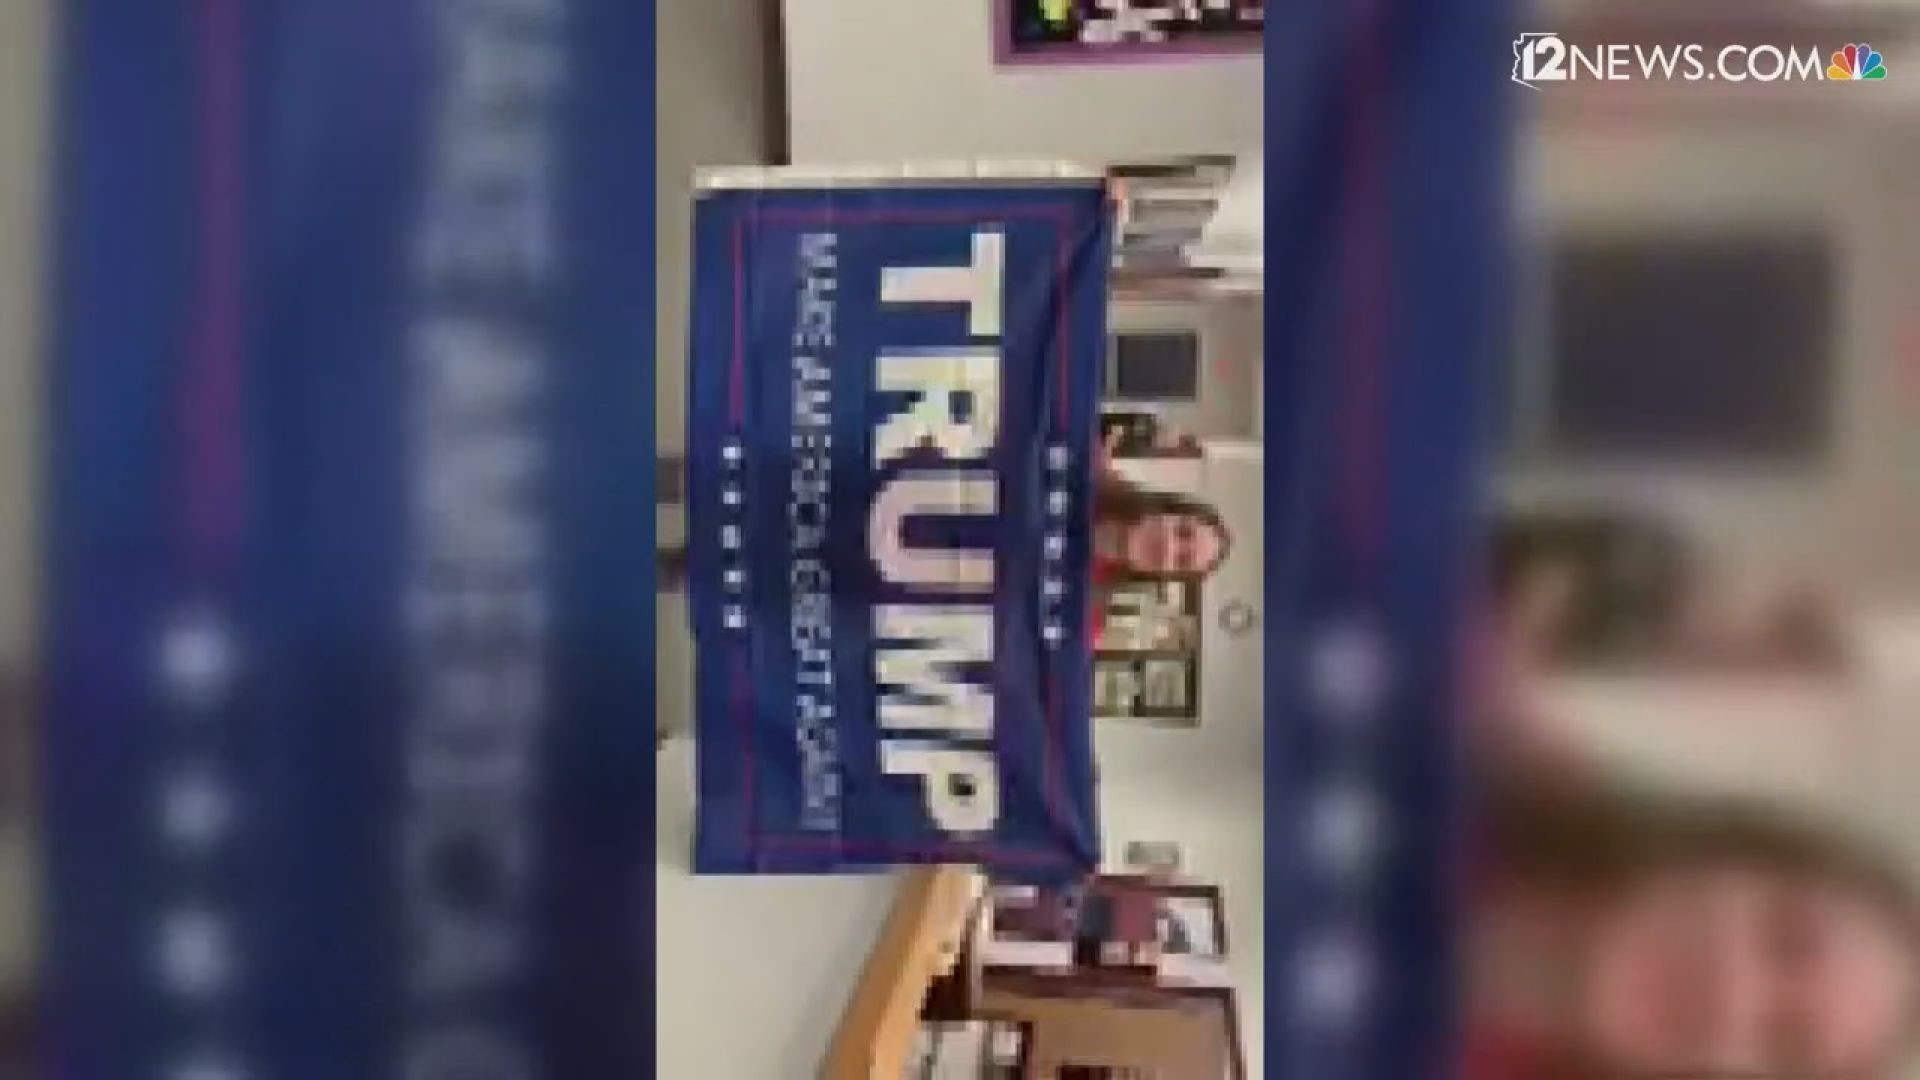 After students brought a pro-Trump banner to Perry High School, they got into an argument with another group. A student's mother filmed her interaction with school officials after she arrived at the school.